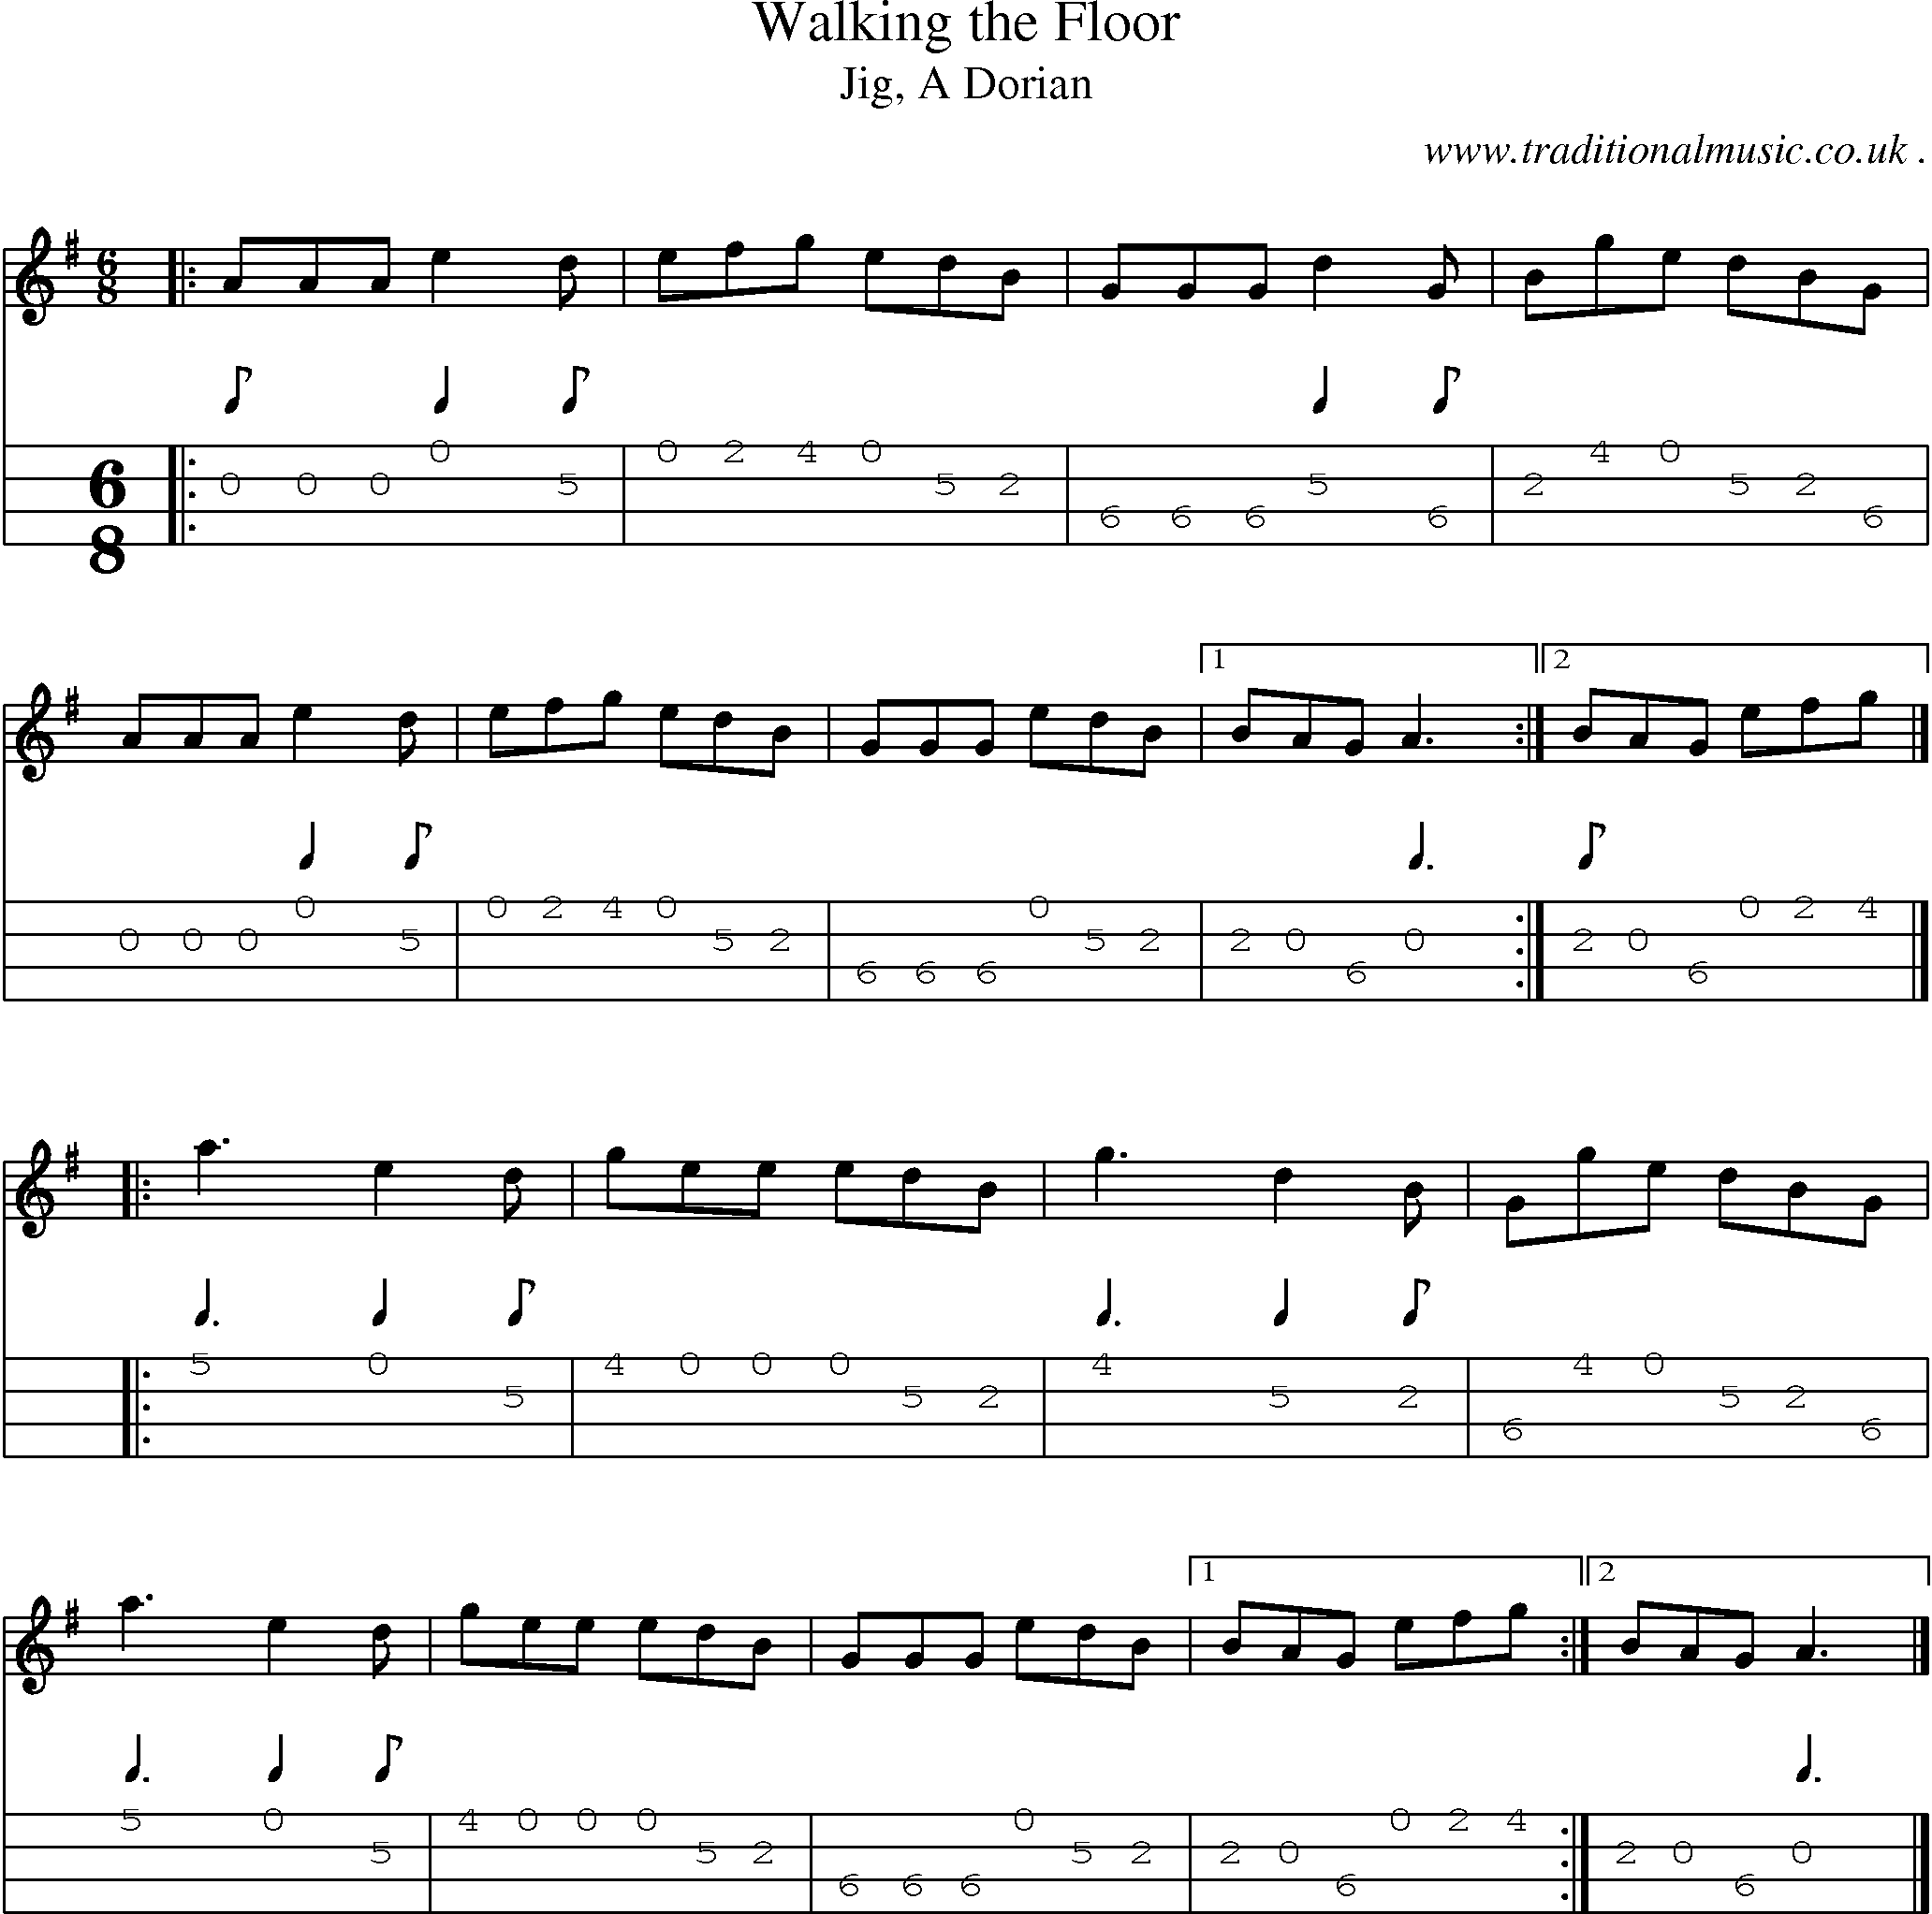 Sheet-music  score, Chords and Mandolin Tabs for Walking The Floor